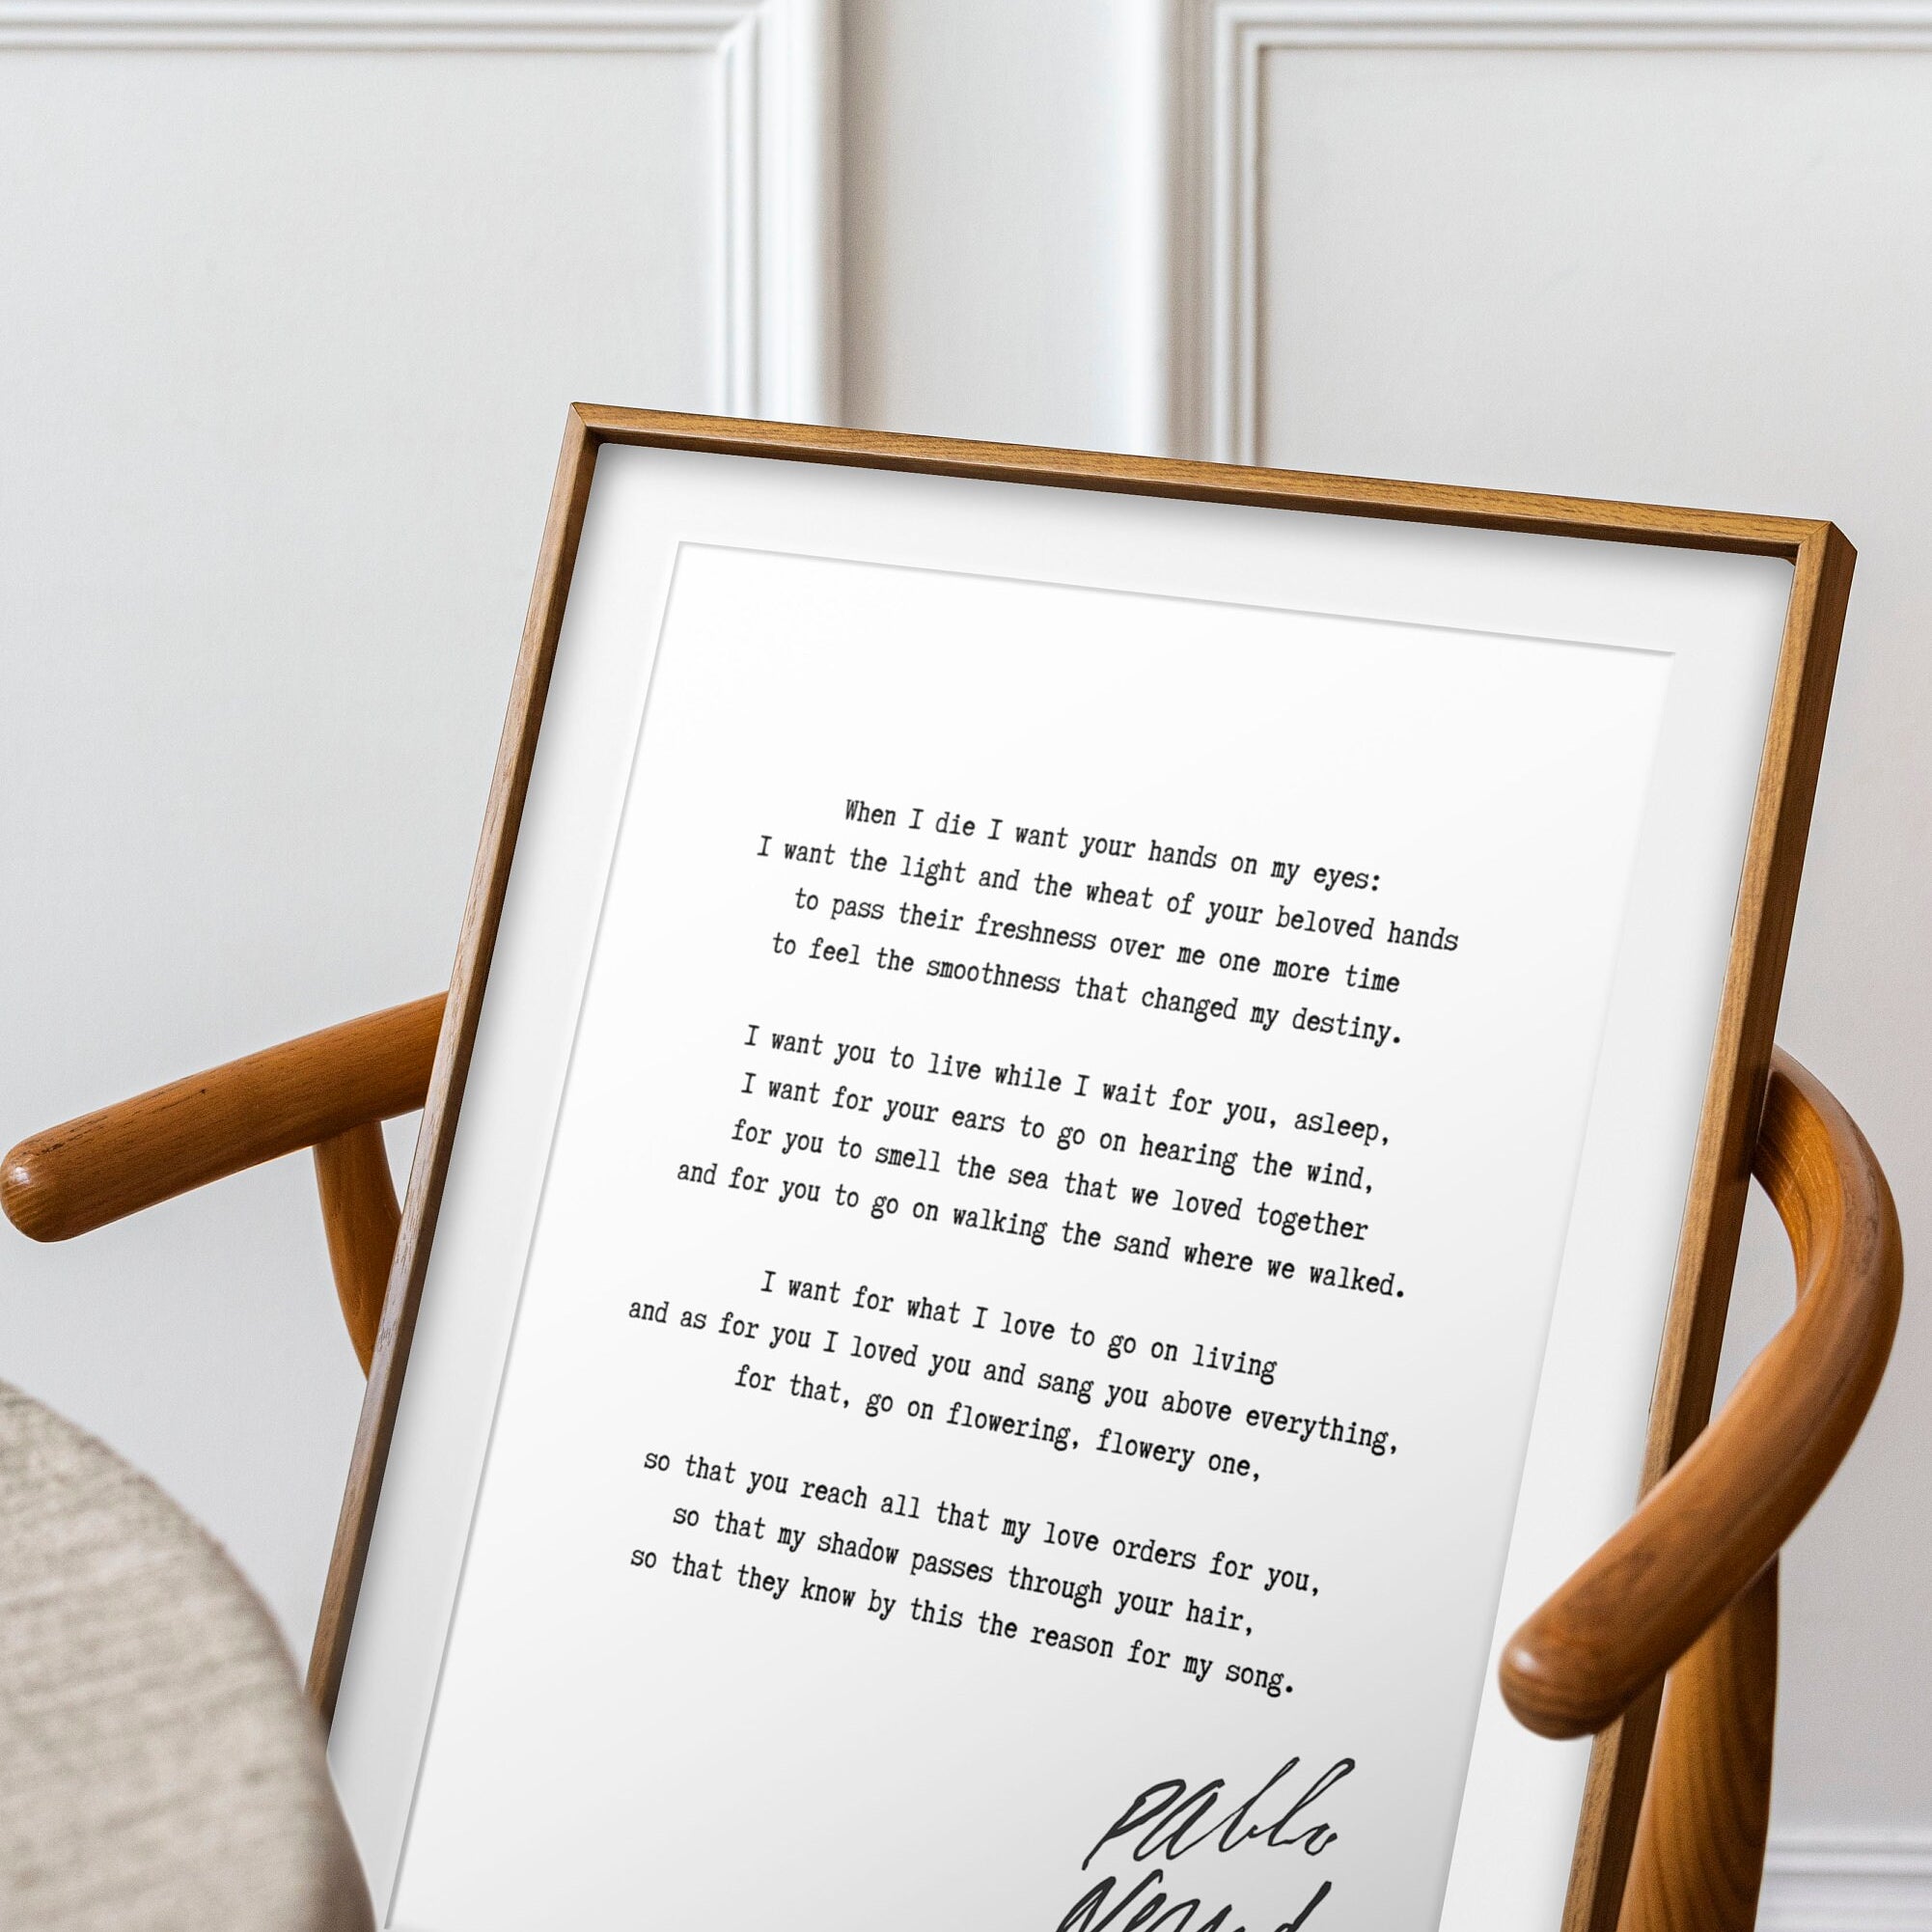 Pablo Neruda When I die I want your hands on my eyes, Unframed or Framed Romantic Love Poem Print in Black & White Wall Art Decor